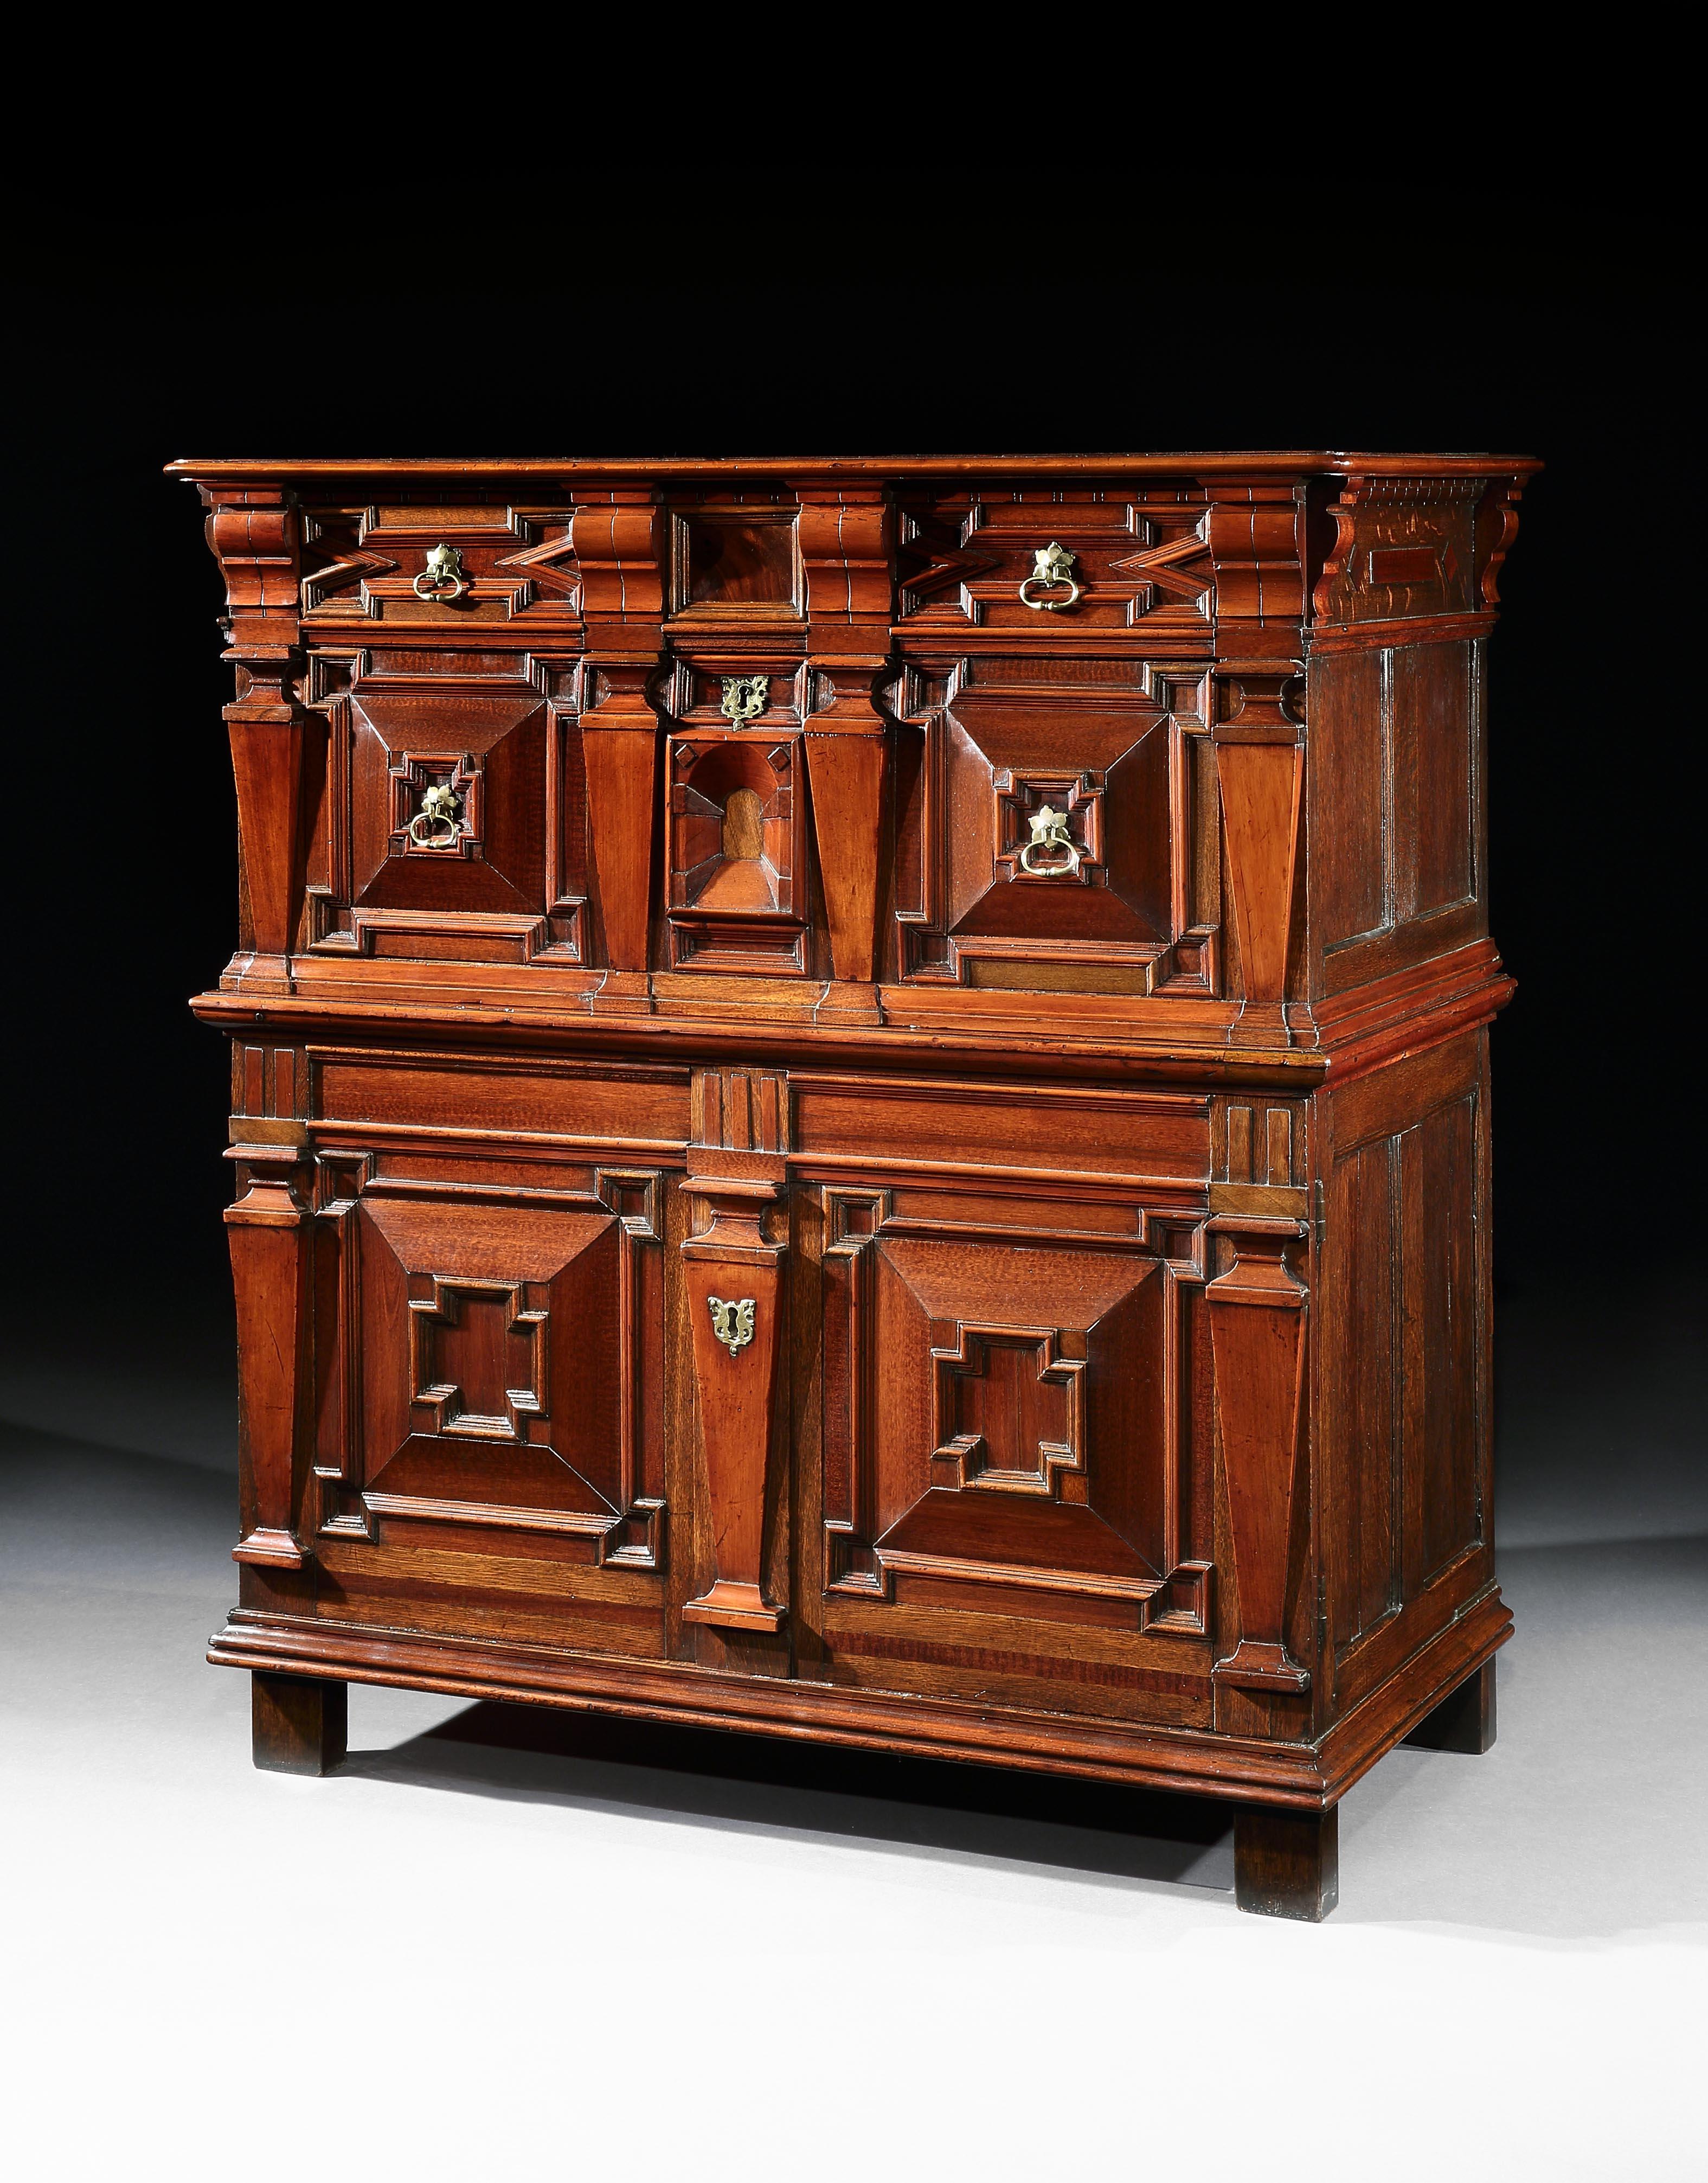 A museum quality, English, Late-Renaissance, cedar enclosed chest of drawers with exceptional snakewood, walnut & oak with an architectural or façade front

This is the most sophisticated English model of chest of drawers conceived as a cabinet